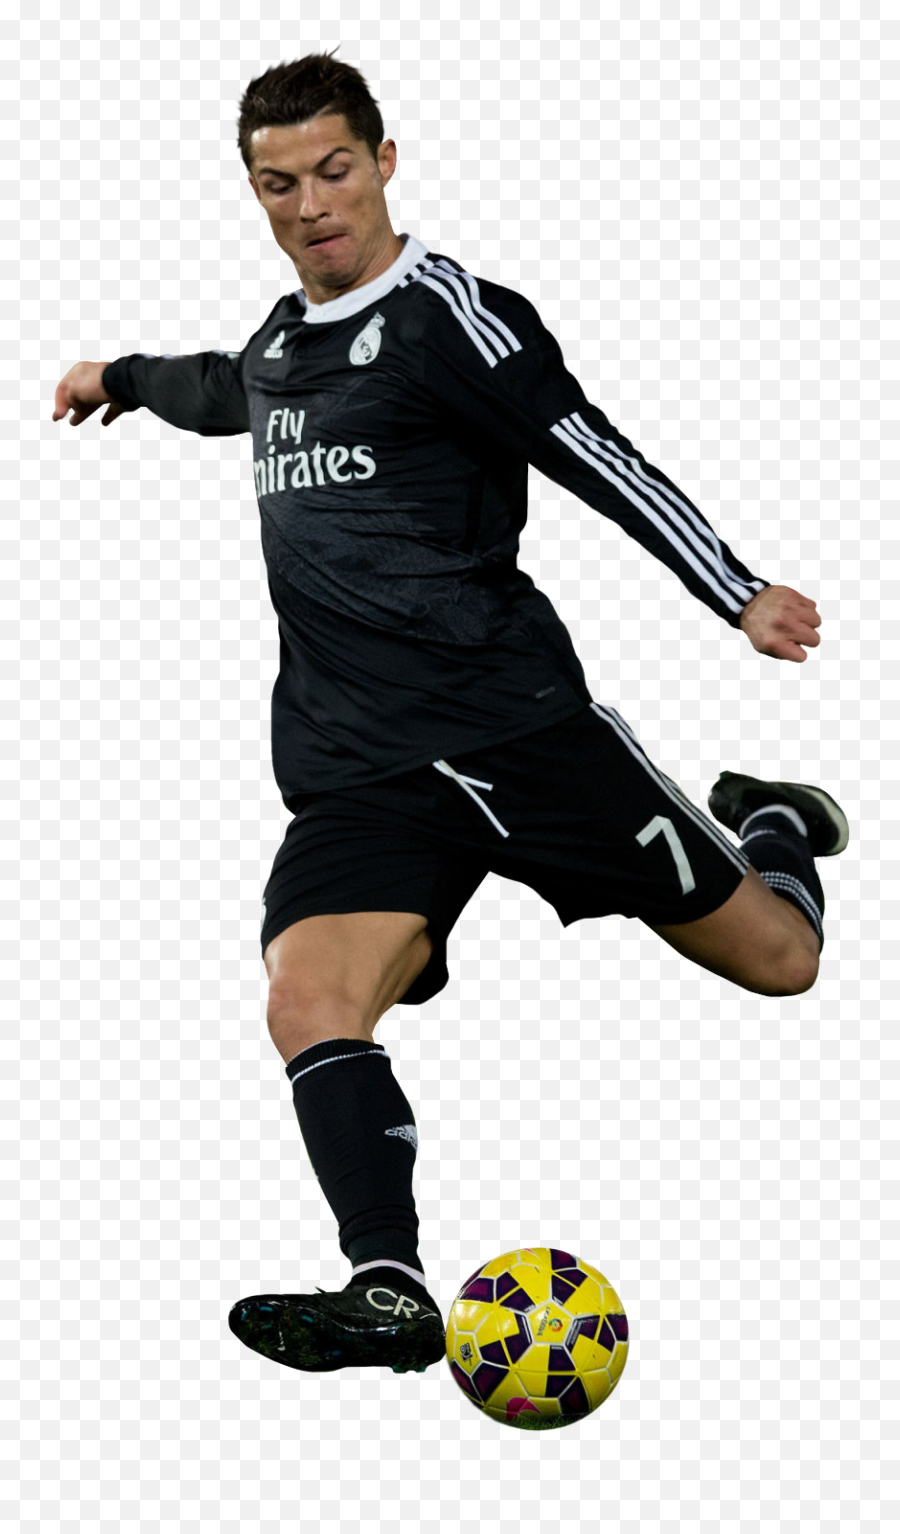 Download Real Cristiano Portugal Madrid Ronaldo Football - Cristiano Ronaldo Without Background Emoji,Football Player Clipart